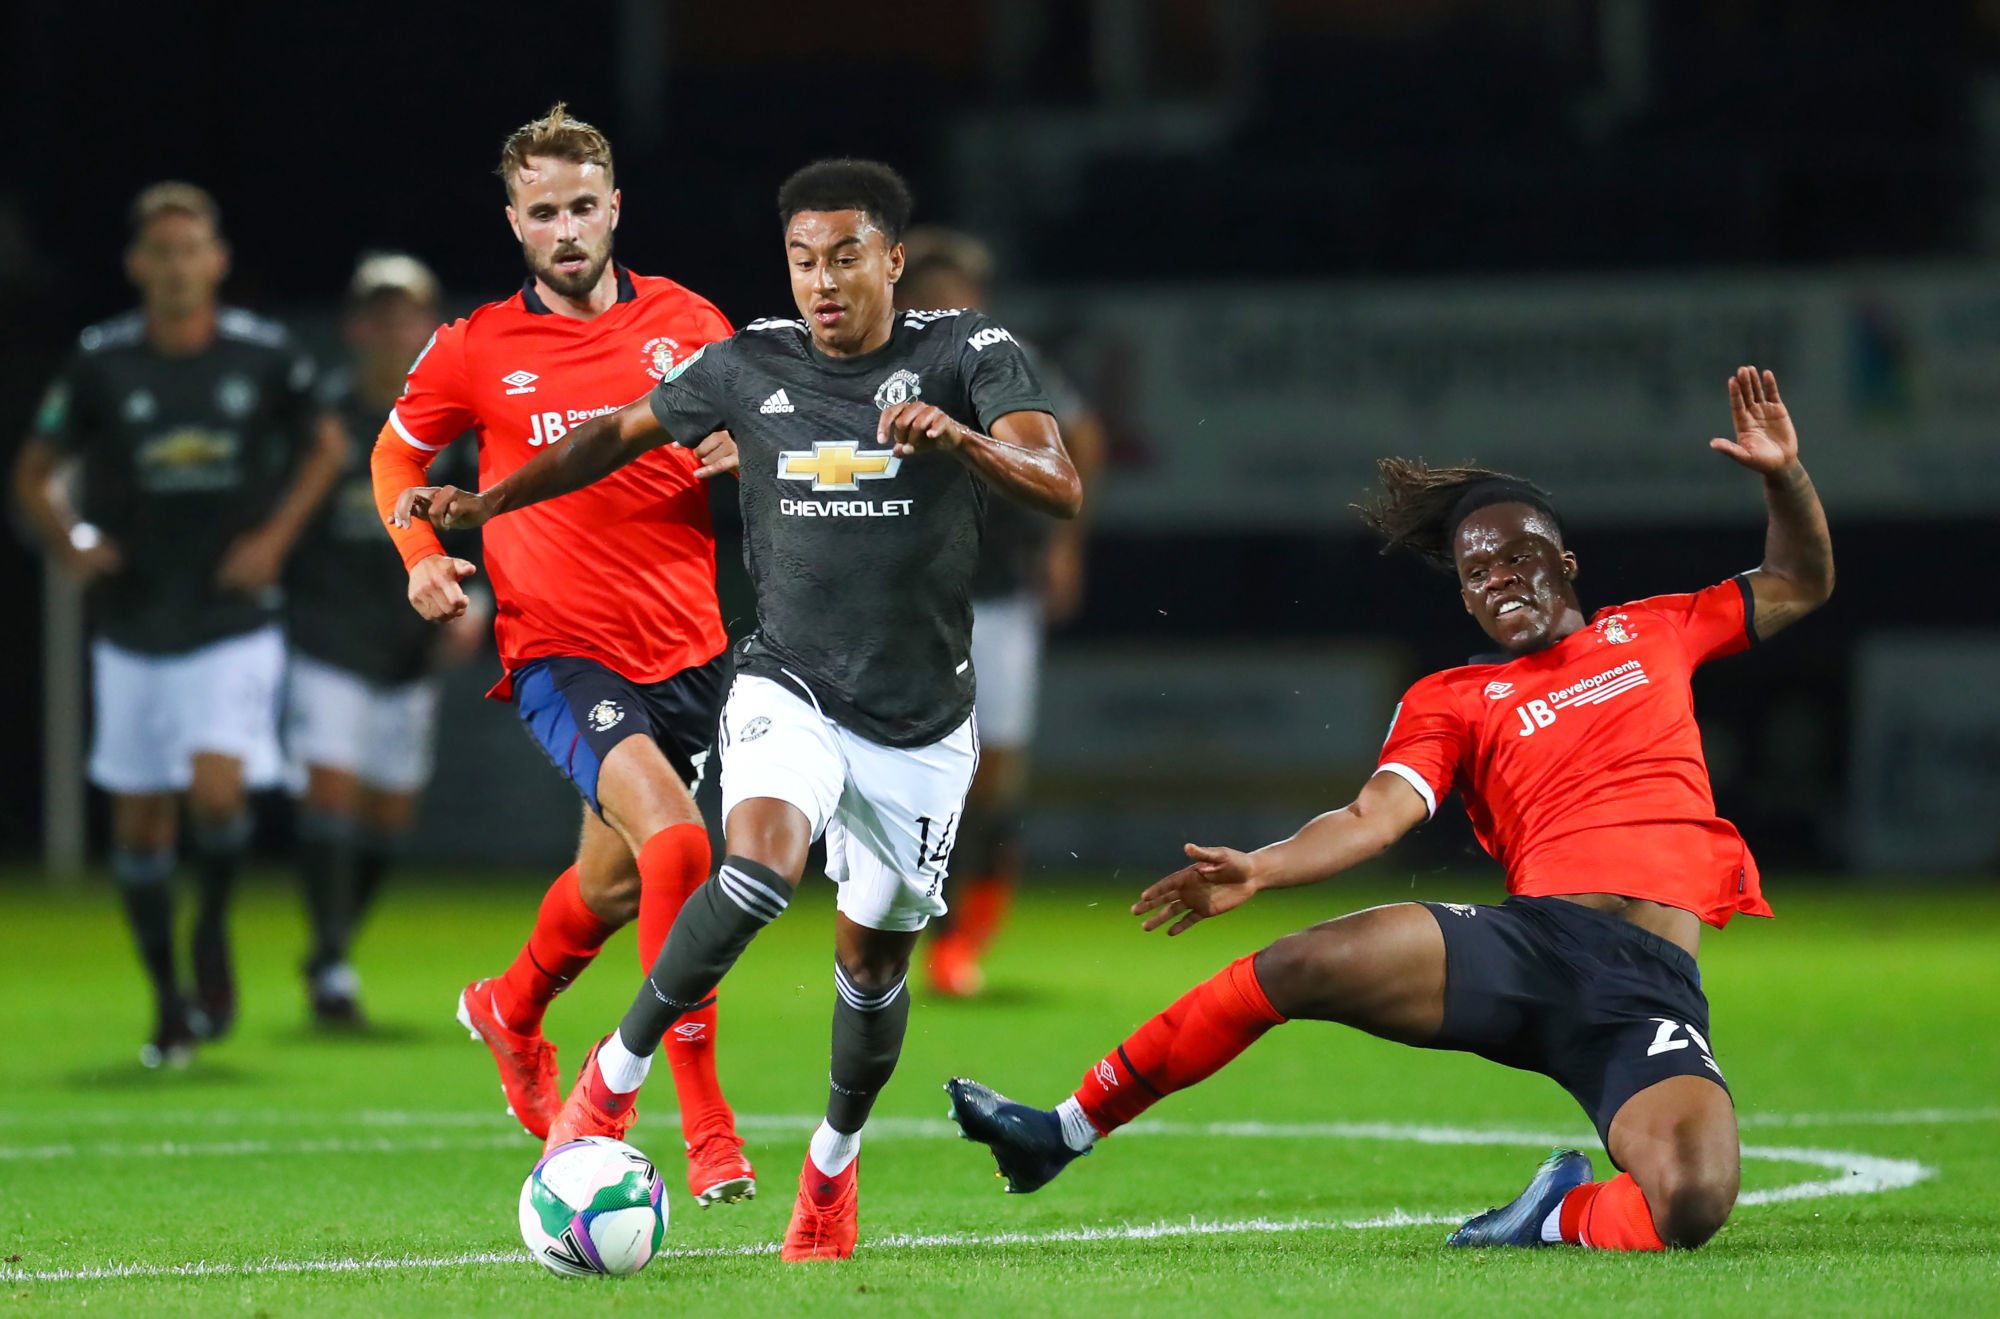 Luton Town's Peter Kioso (right) challenges Manchester United's Jesse Lingard during the Carabao Cup third round match at Kenilworth Road, Luton. 
By Icon Sport - Kenilworth Road - Luton (Angleterre)